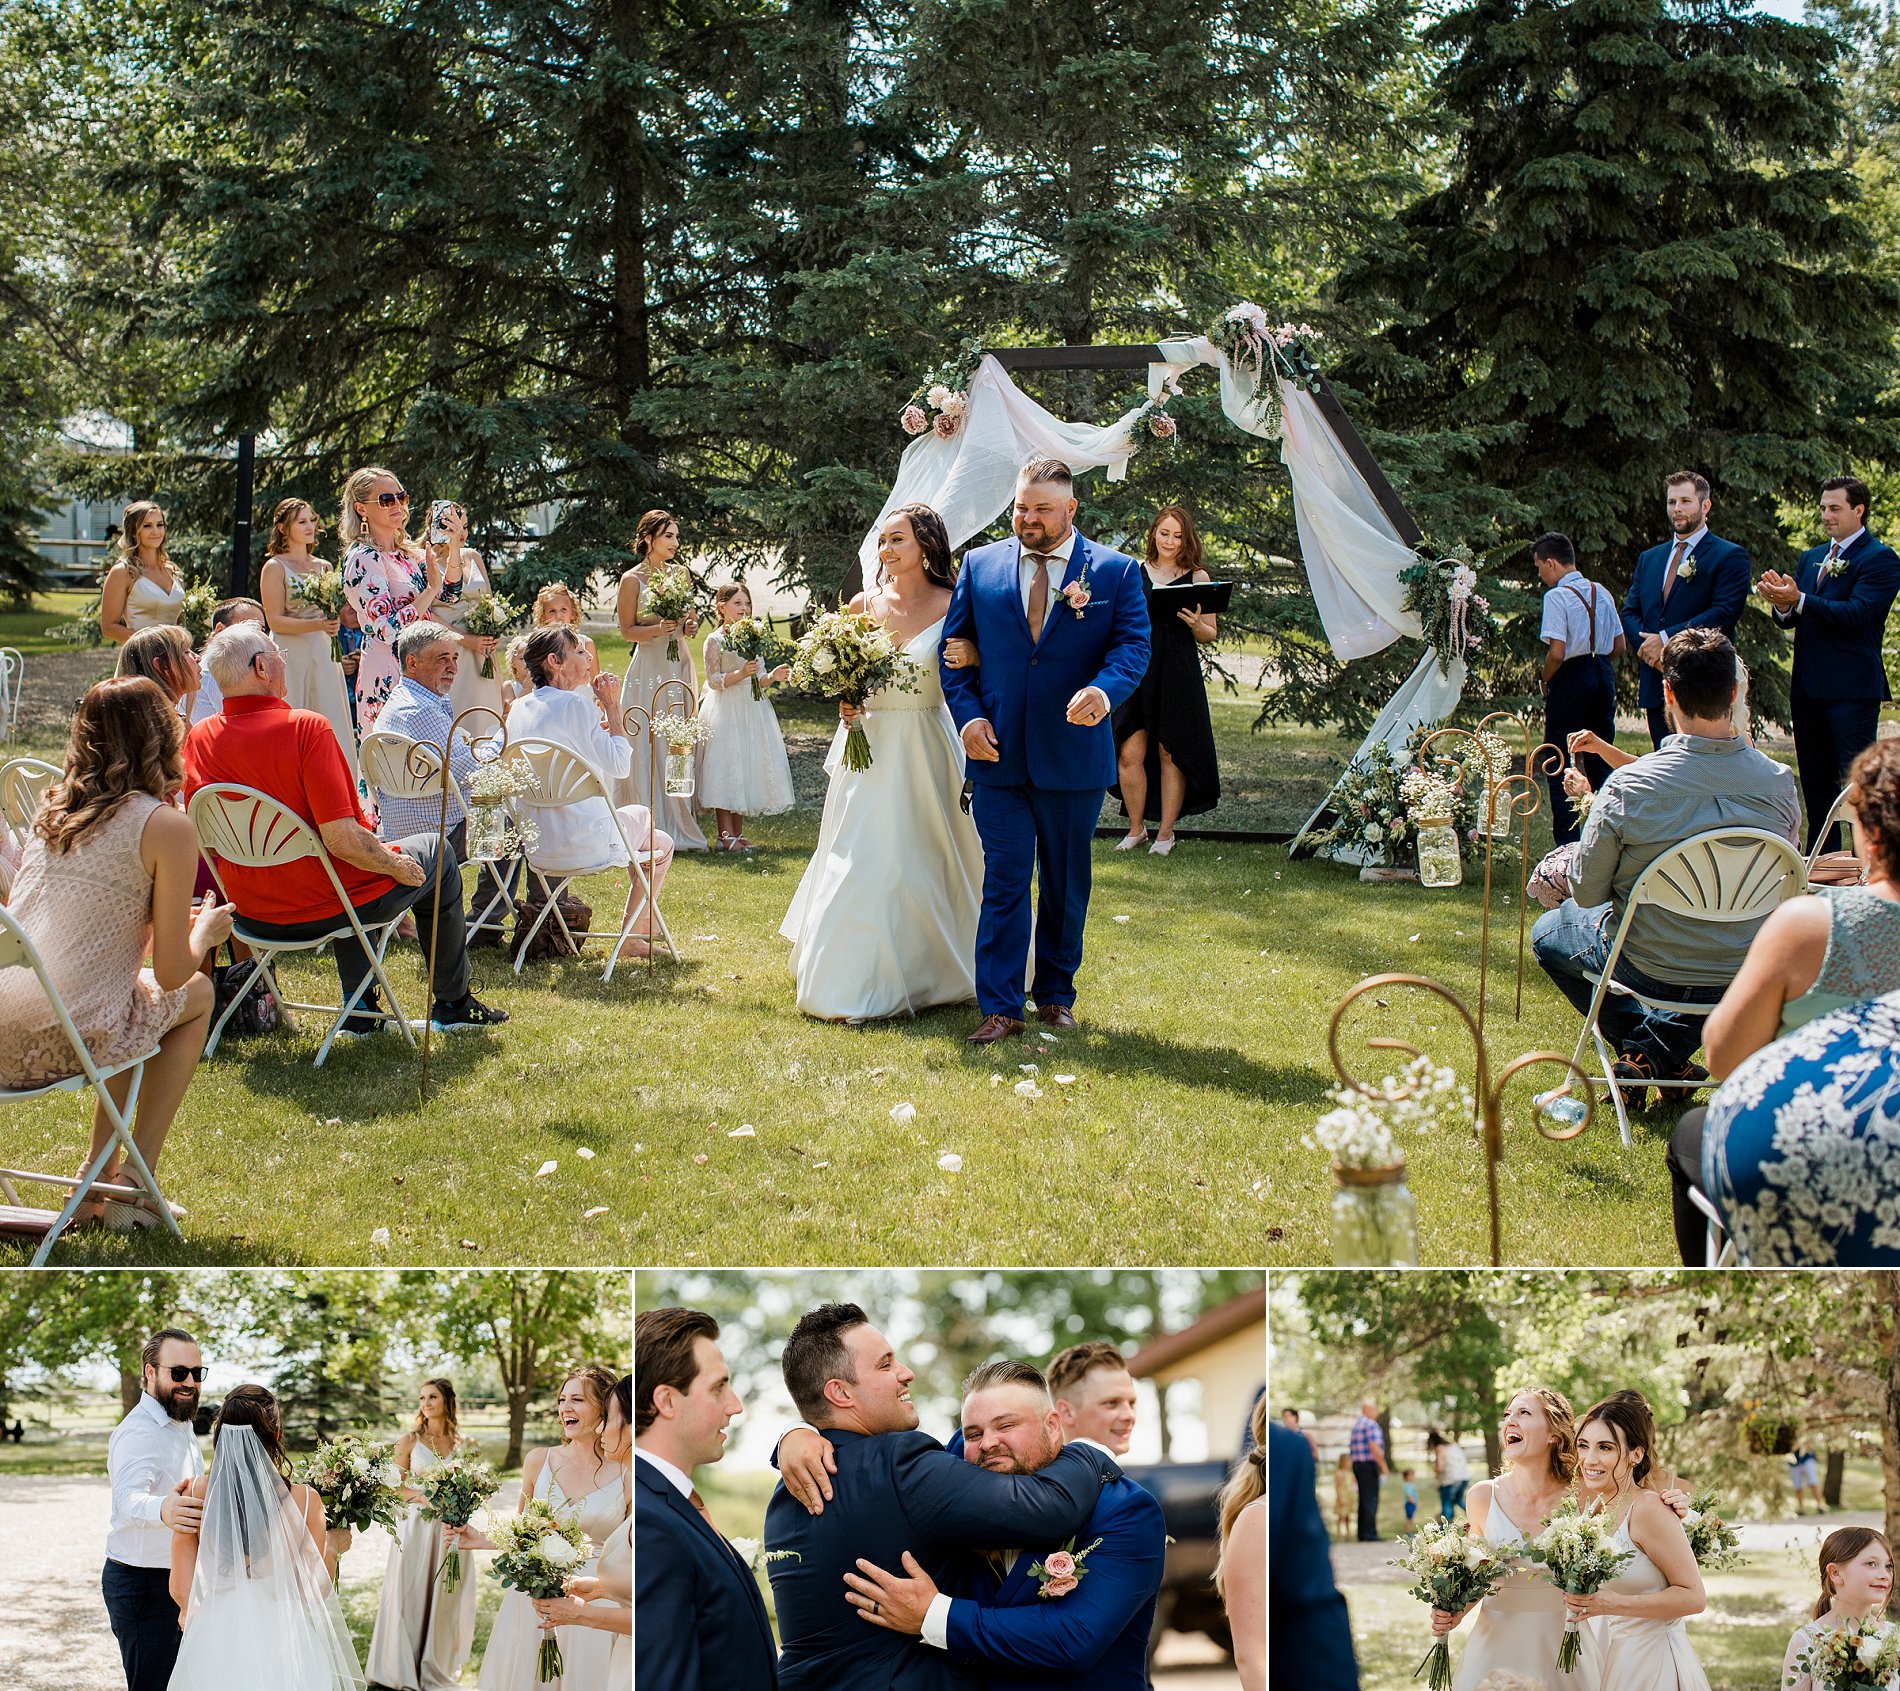 Bride and groom are congratulated by their loved ones after their backyard wedding ceremony.